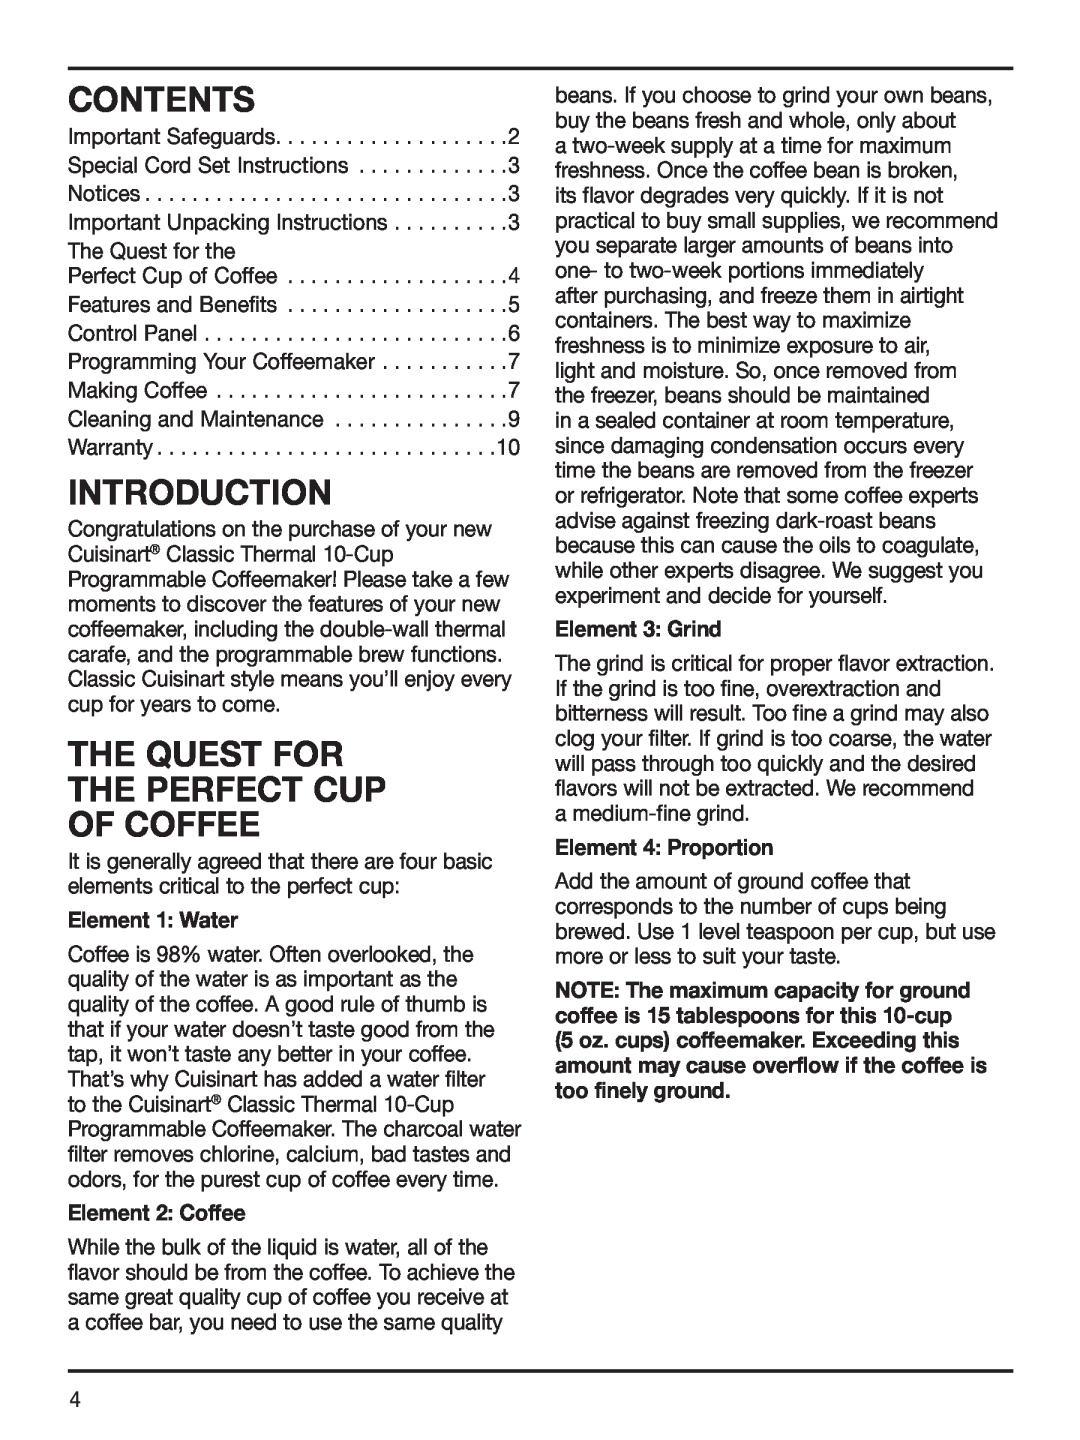 Cuisinart IB-7294 manual Contents, Introduction, The Quest For The Perfect Cup Of Coffee, Element 1 Water, Element 2 Coffee 